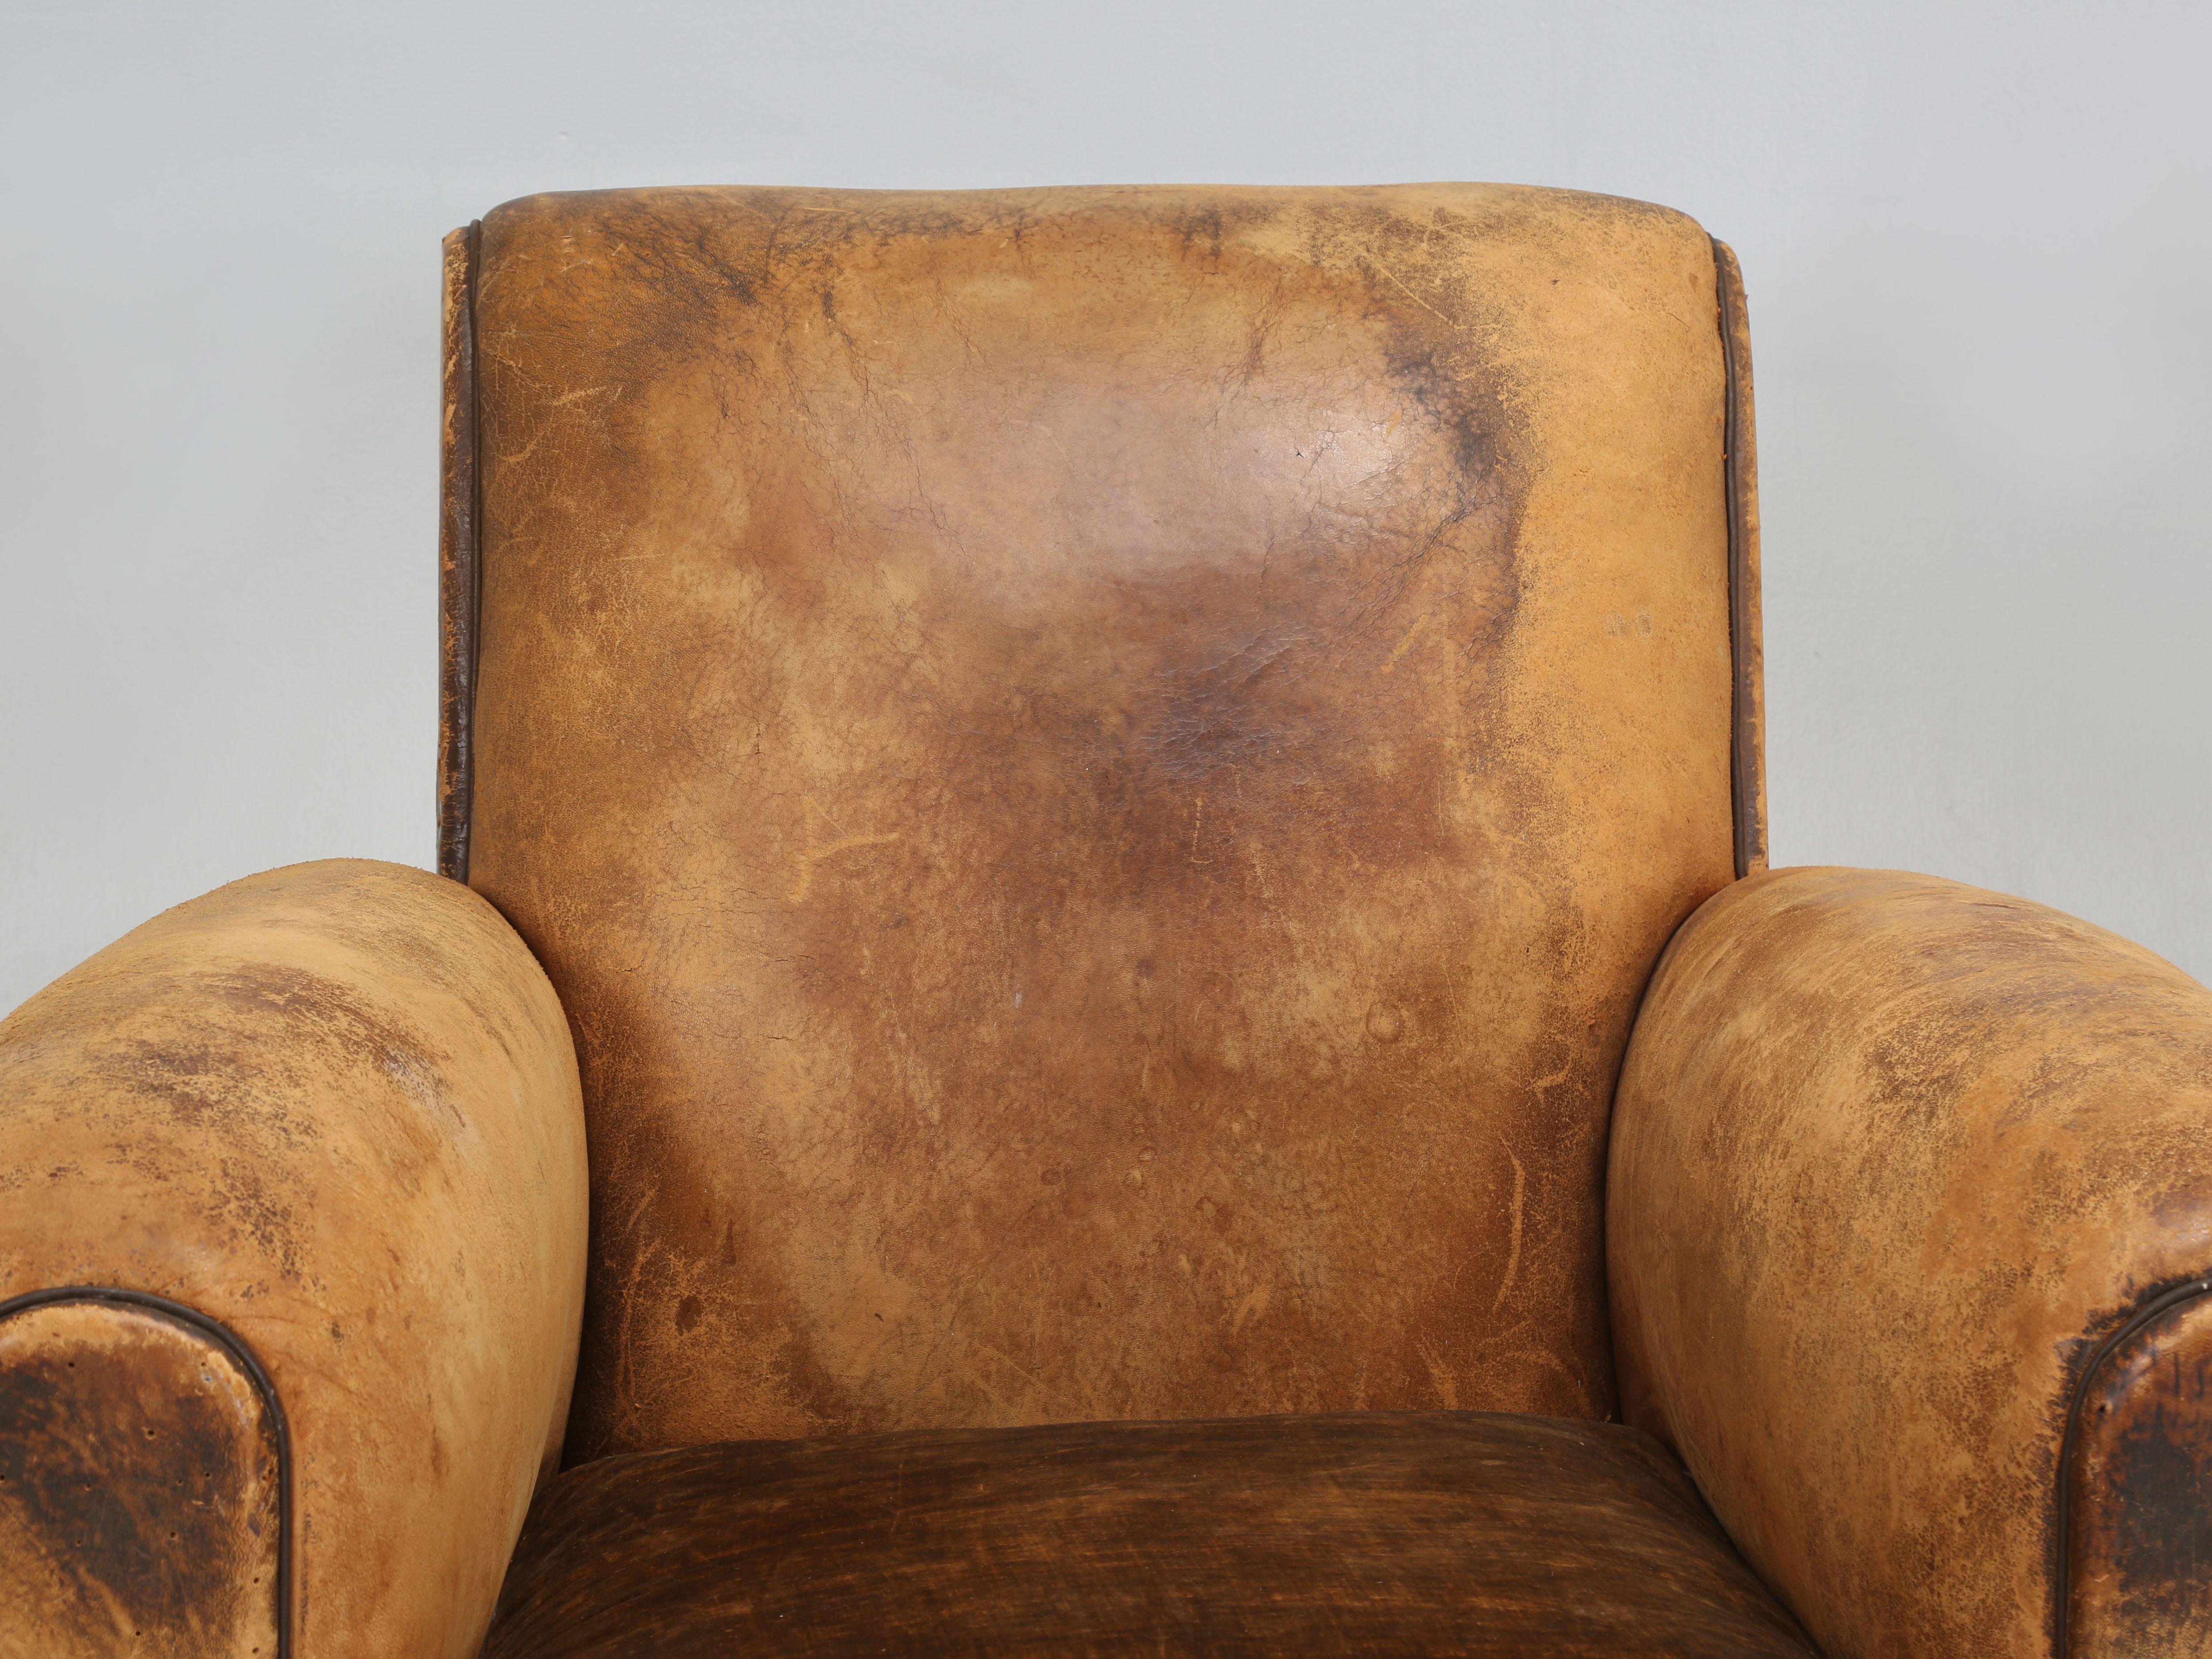 Pair of Fully Restored French Leather Club Chairs from the Art Deco Period. Our Old Plank upholstery department has been restoring French Club Chairs for over 30-years and what we pride ourselves most with, is the fact that when we’re finished, the